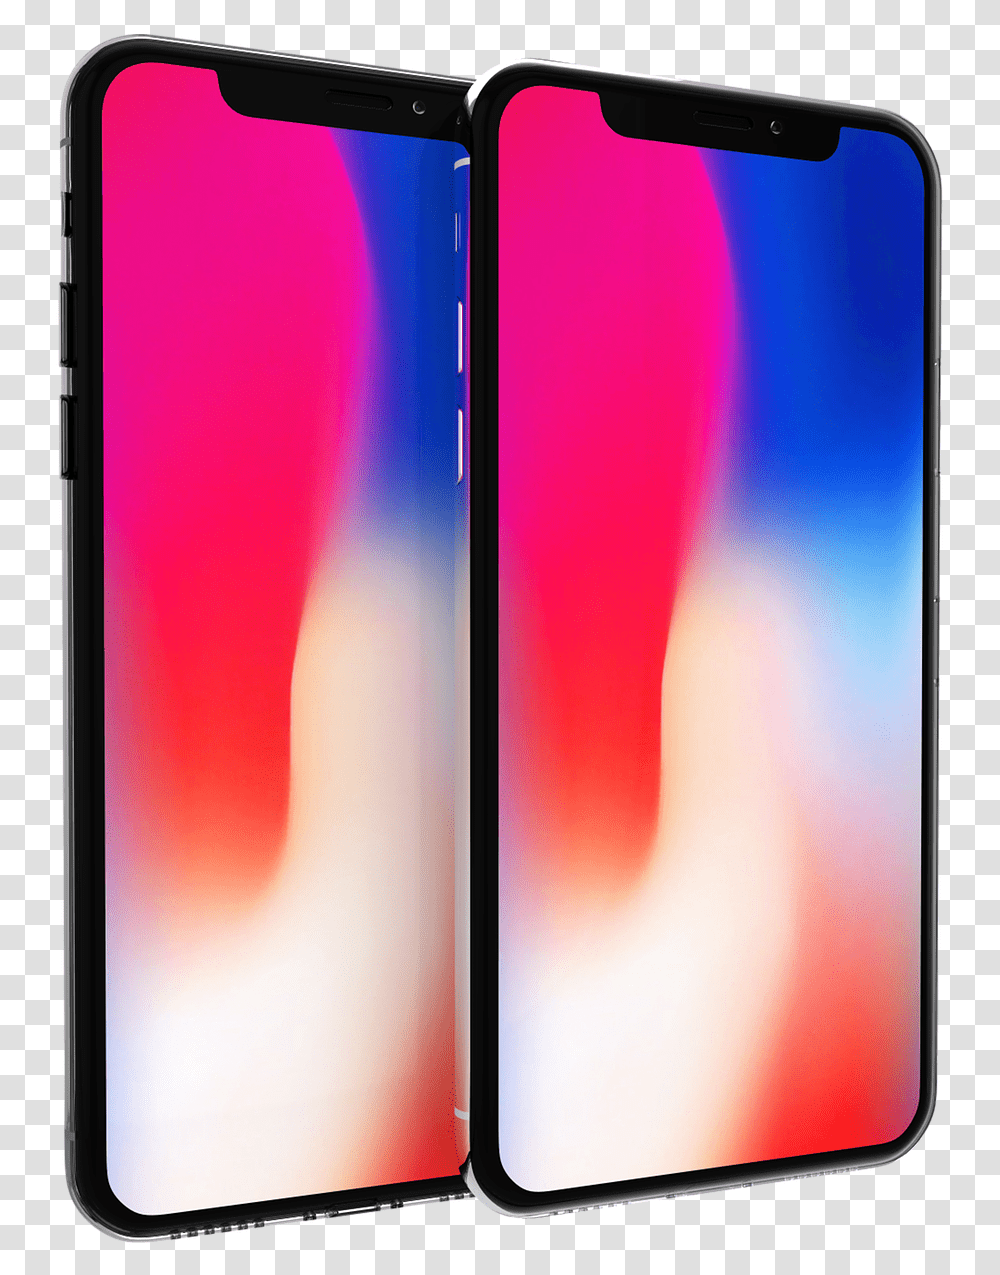 Iphone X Mockup Free Photo On Pixabay Iphone X, Mobile Phone, Electronics, Cell Phone, Screen Transparent Png